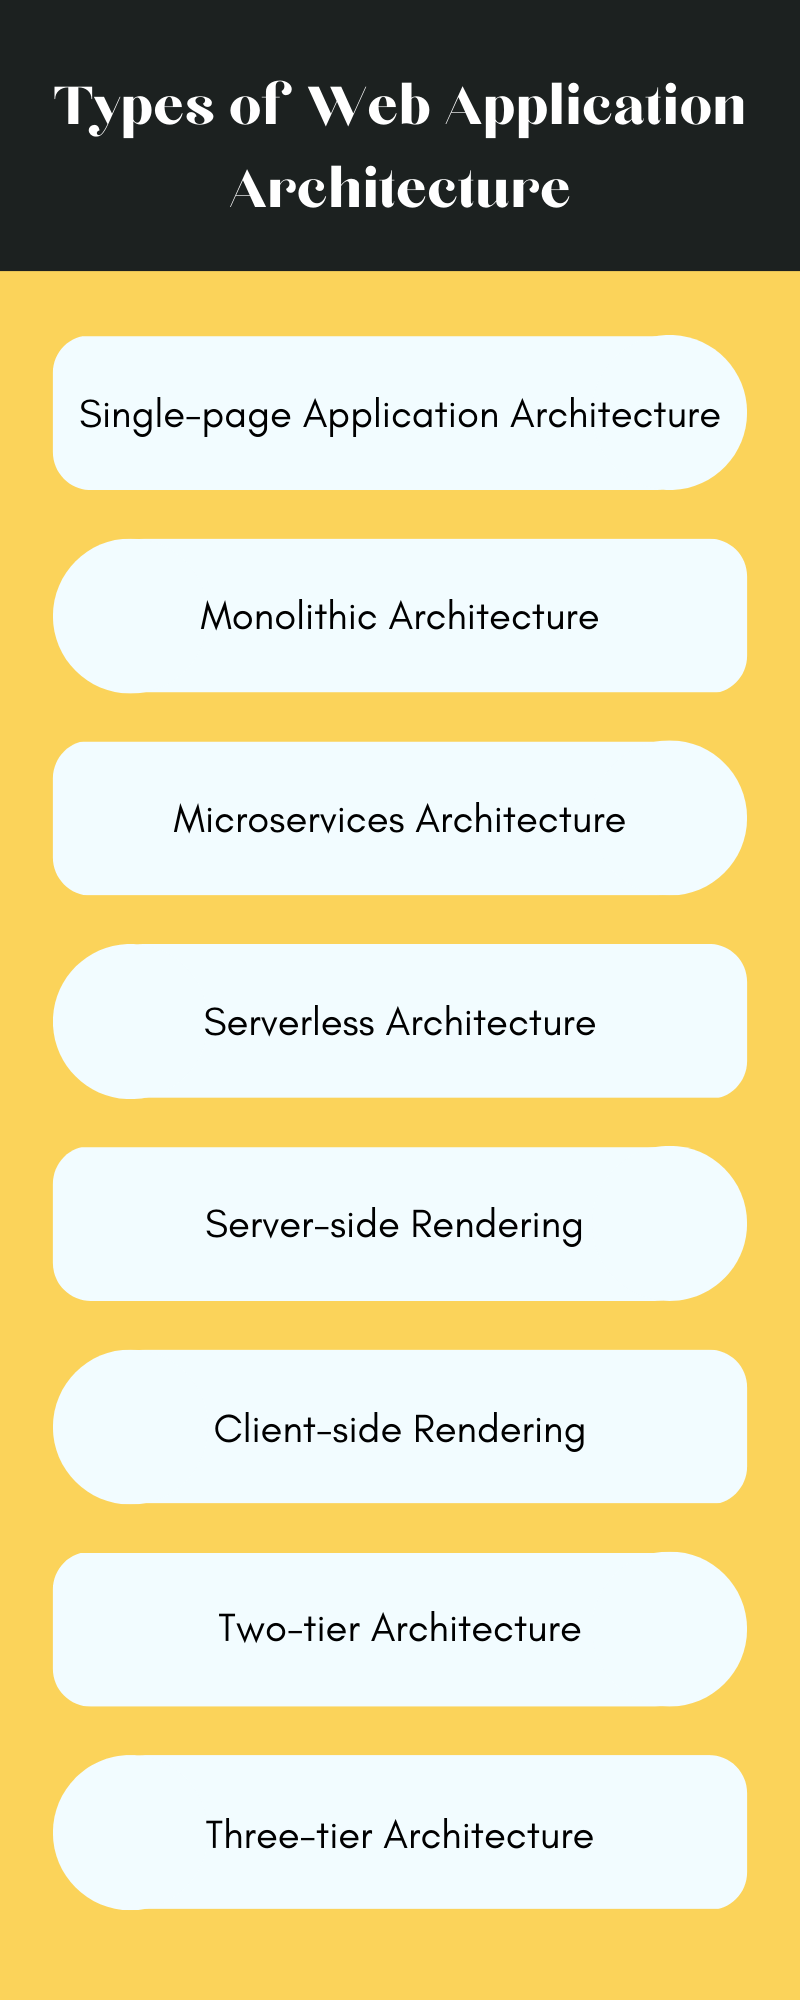 Types of Web Application Architecture